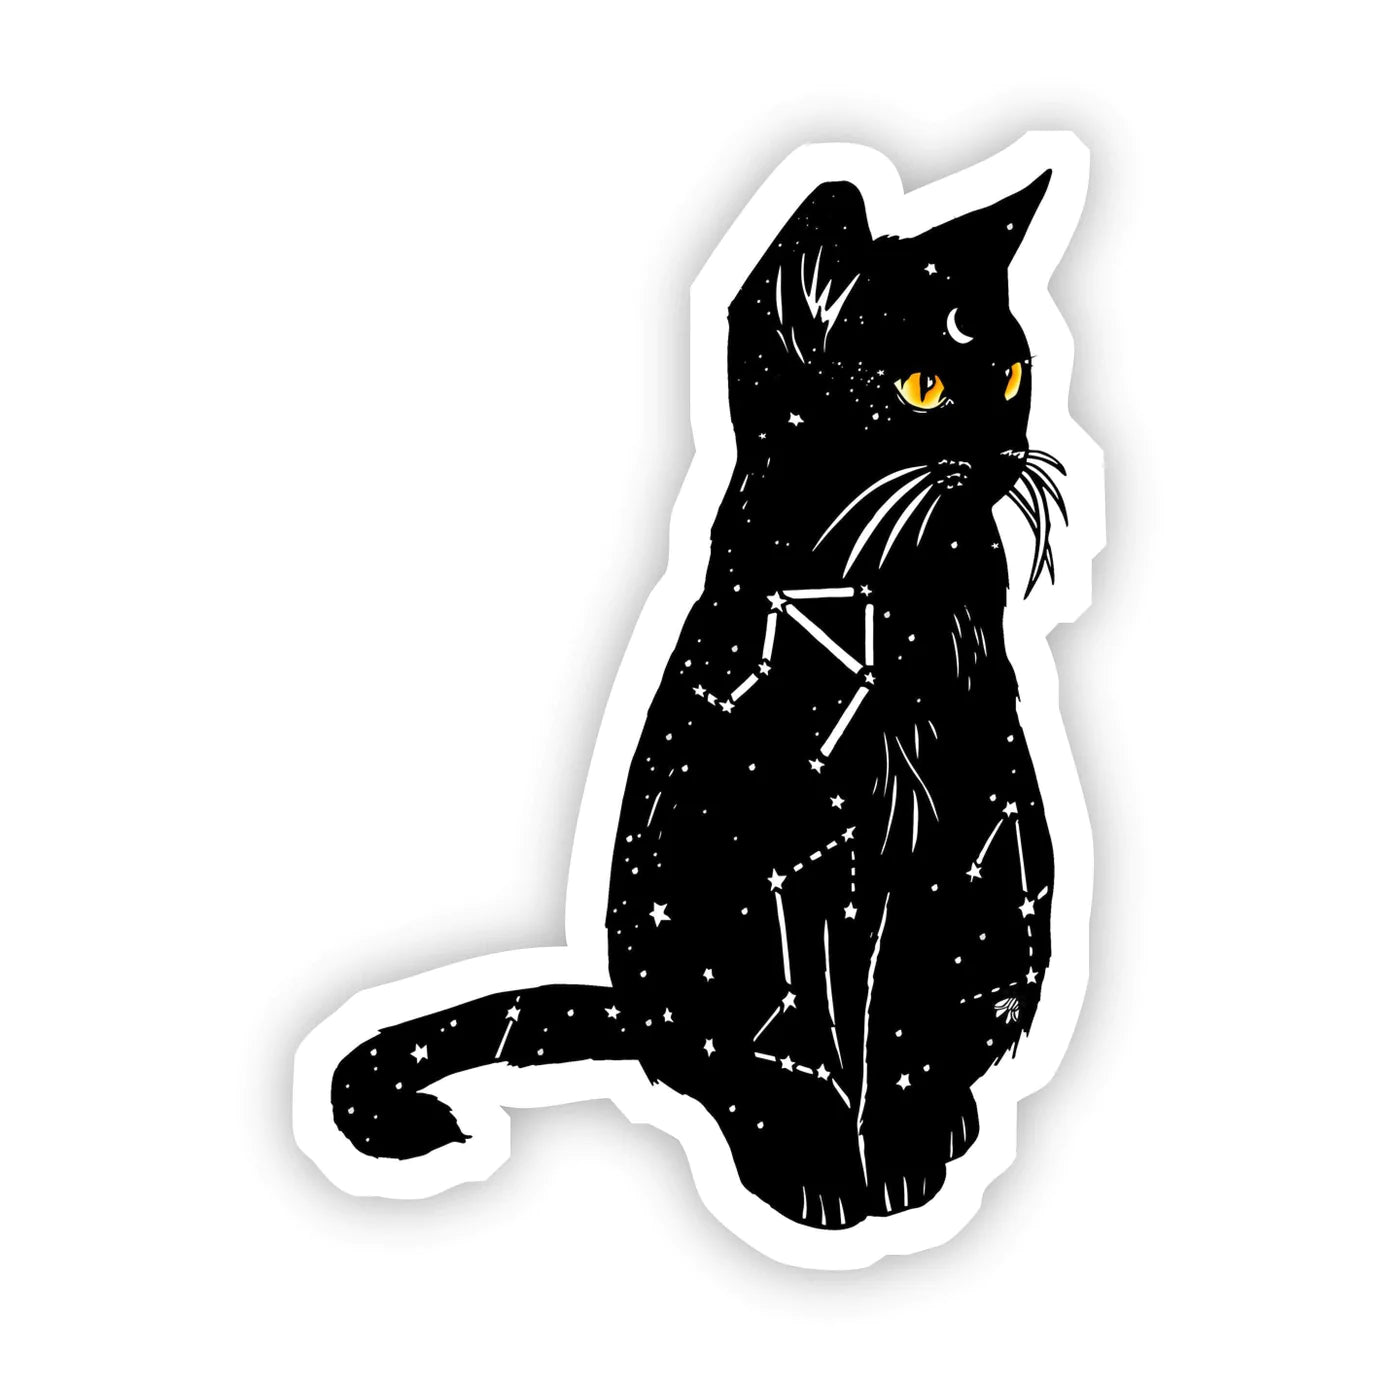 Big Moods Black Cat with Yellow Eyes and Constellation Sticker - Sitting